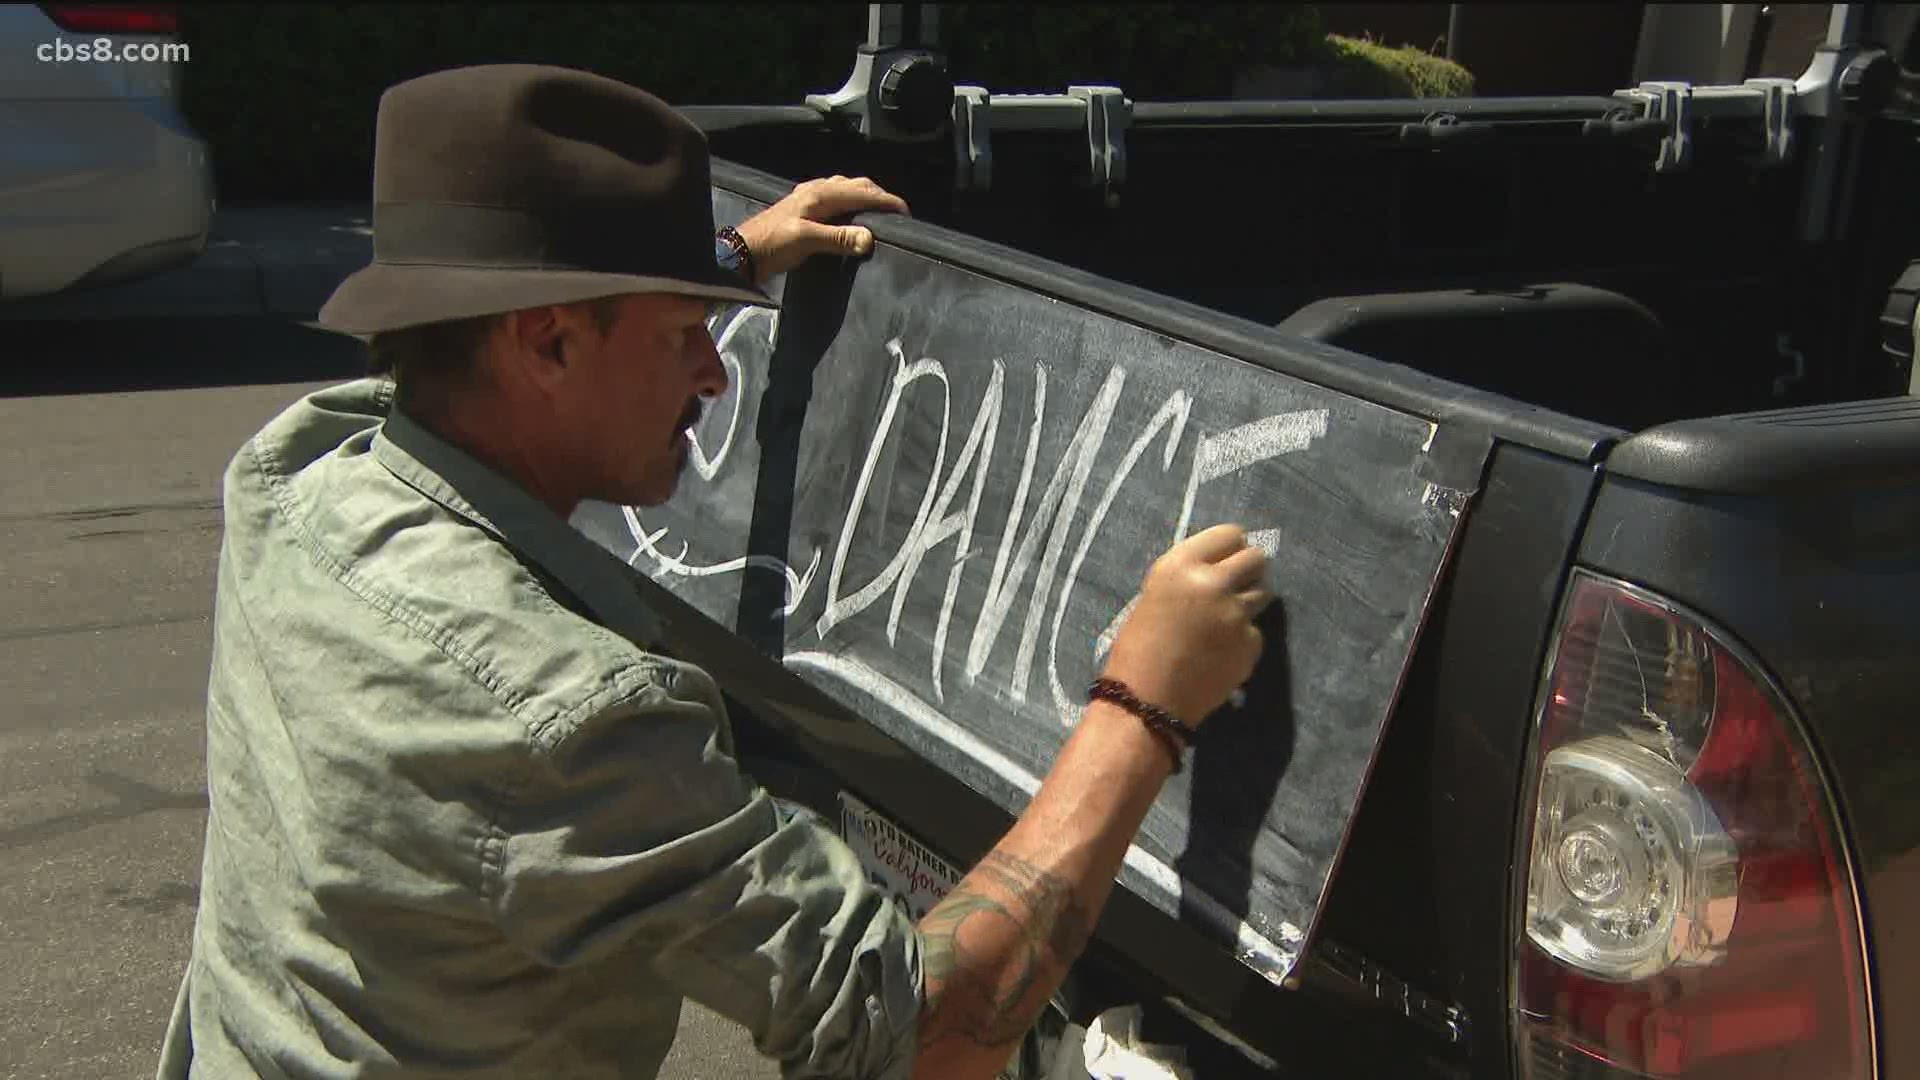 In Pacific Beach, residents have been noticing inspirational messages written on the back of a pick up truck.